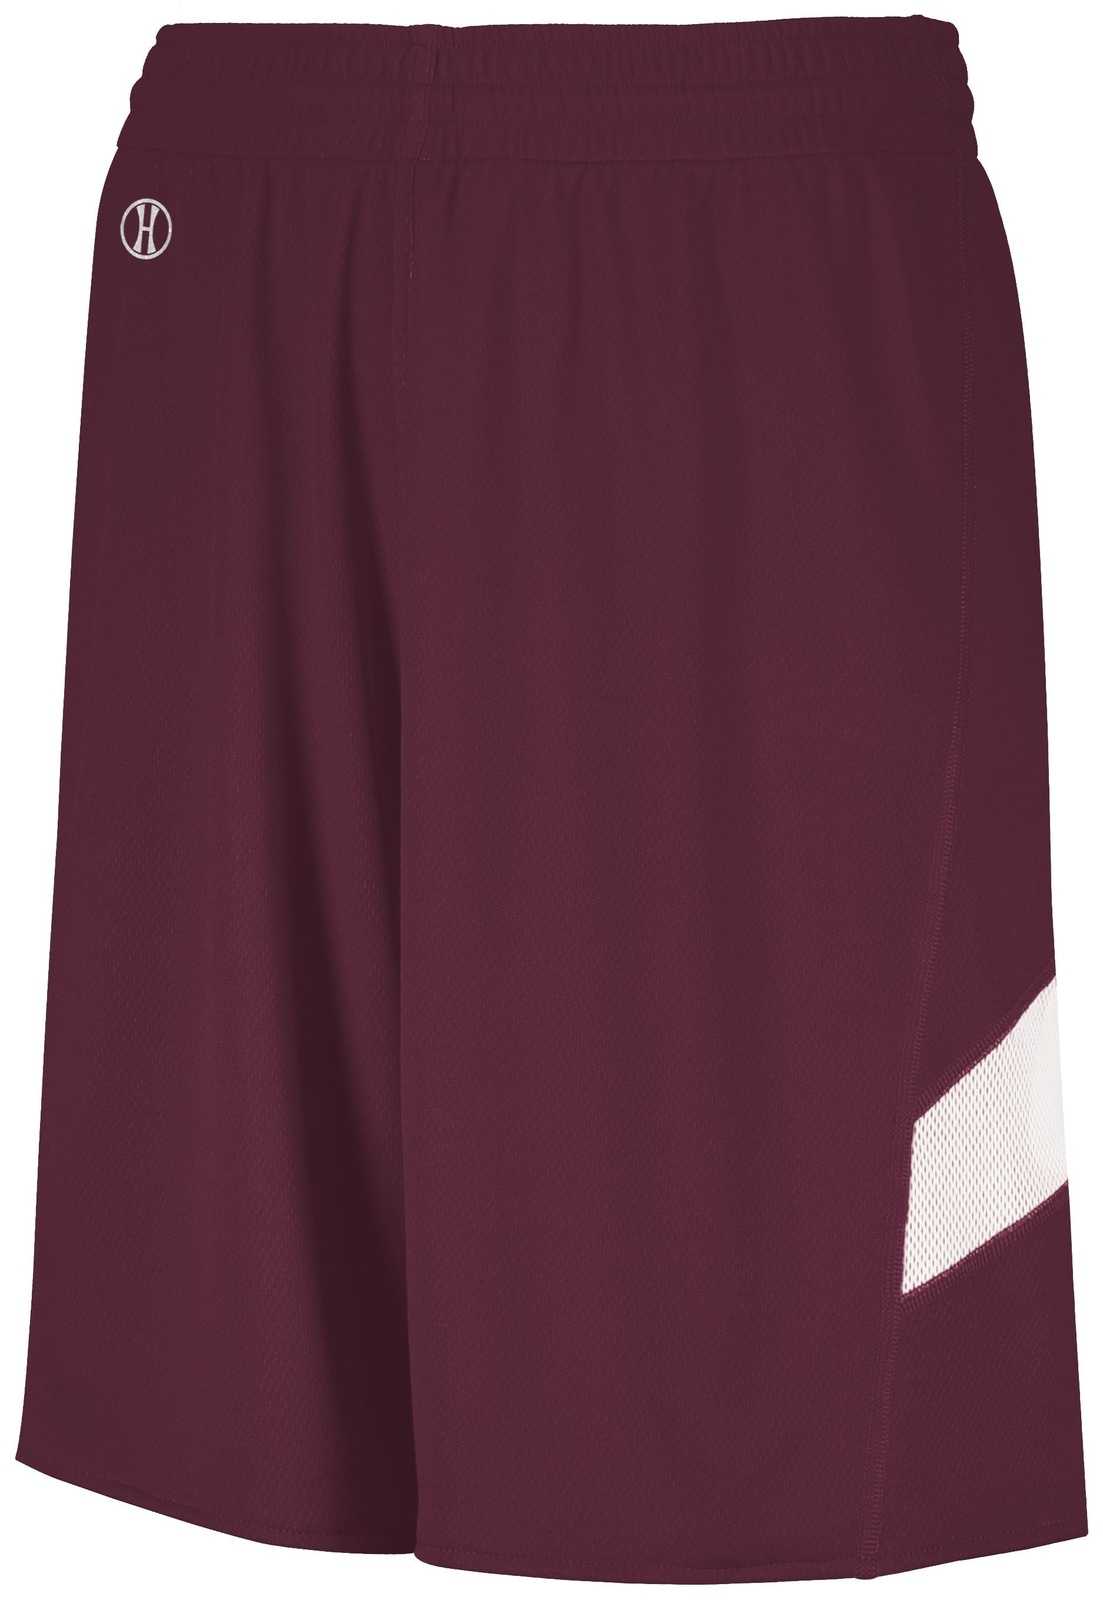 Holloway 224279 Youth Dual-Side Single Ply Basketball Shorts - Maroon White - HIT a Double